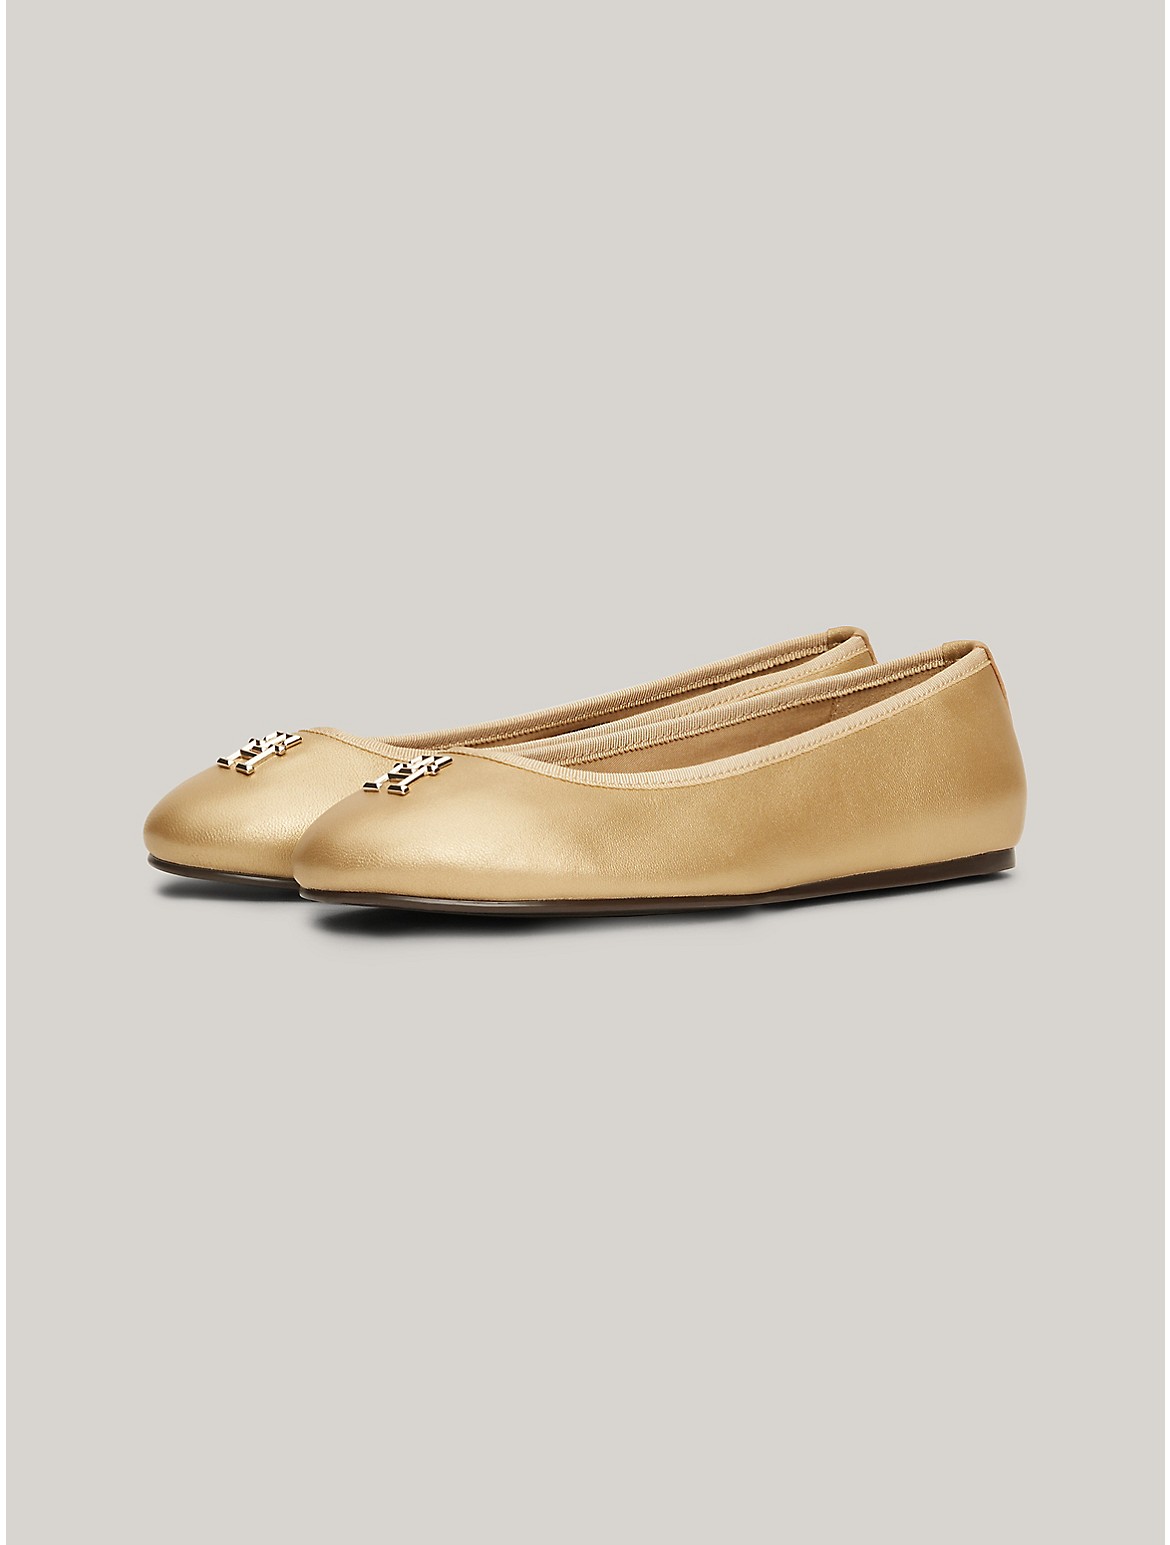 Tommy Hilfiger Women's TH Logo Luxe Leather Ballerina Flat